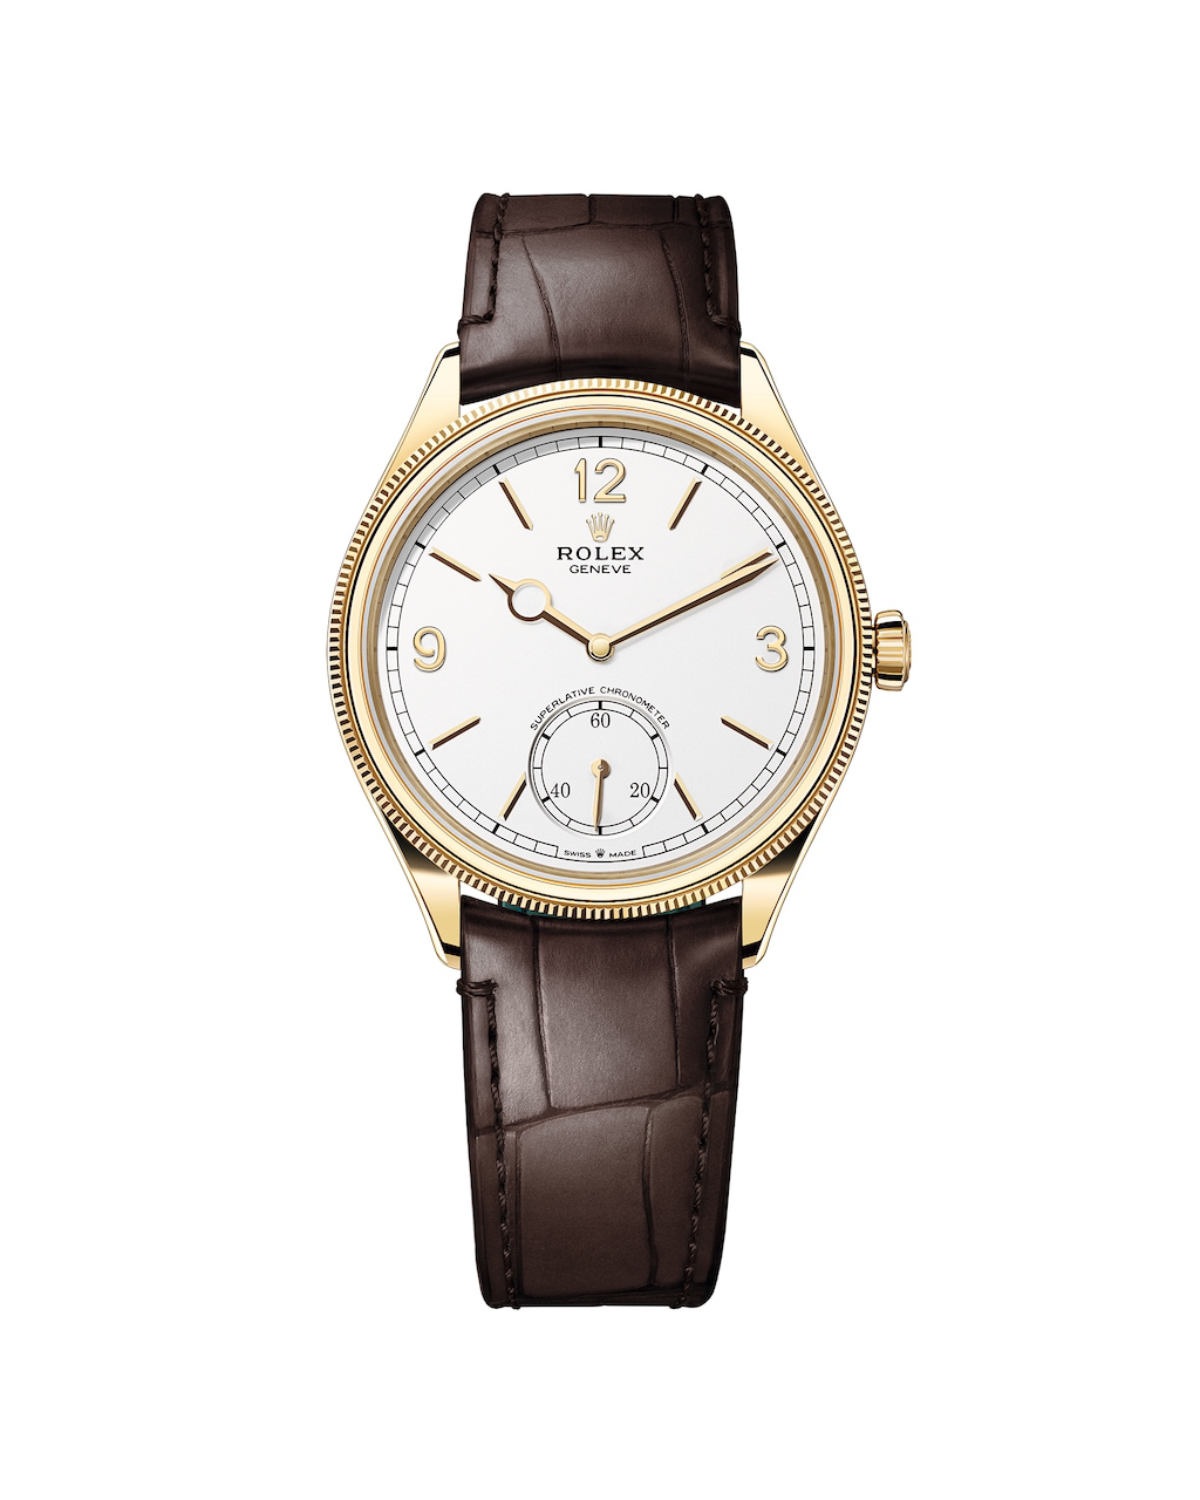 Rolex Perpetual 1908 - The New Face Of Excellence